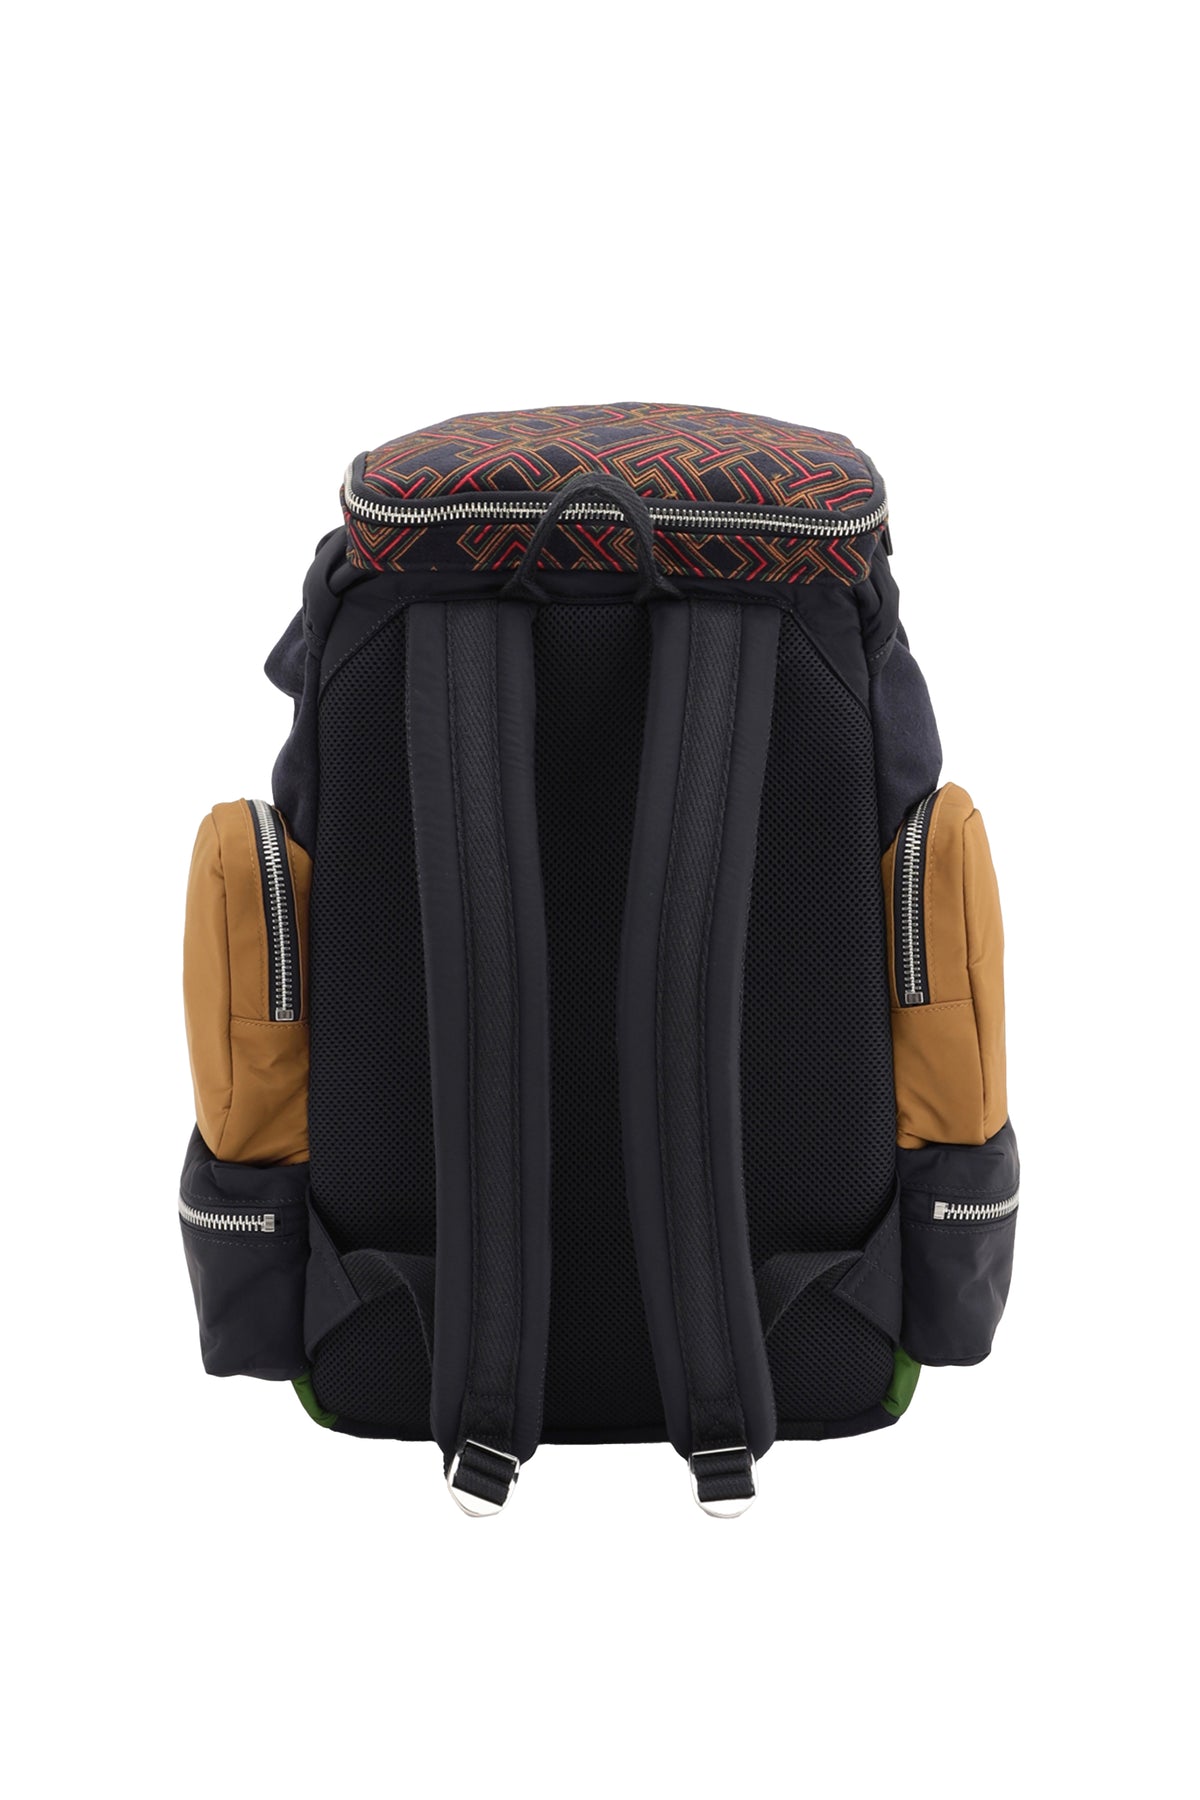 TOMMY HILFIGER x PENDLETON TH X P BACKPACK / NY STP MGM